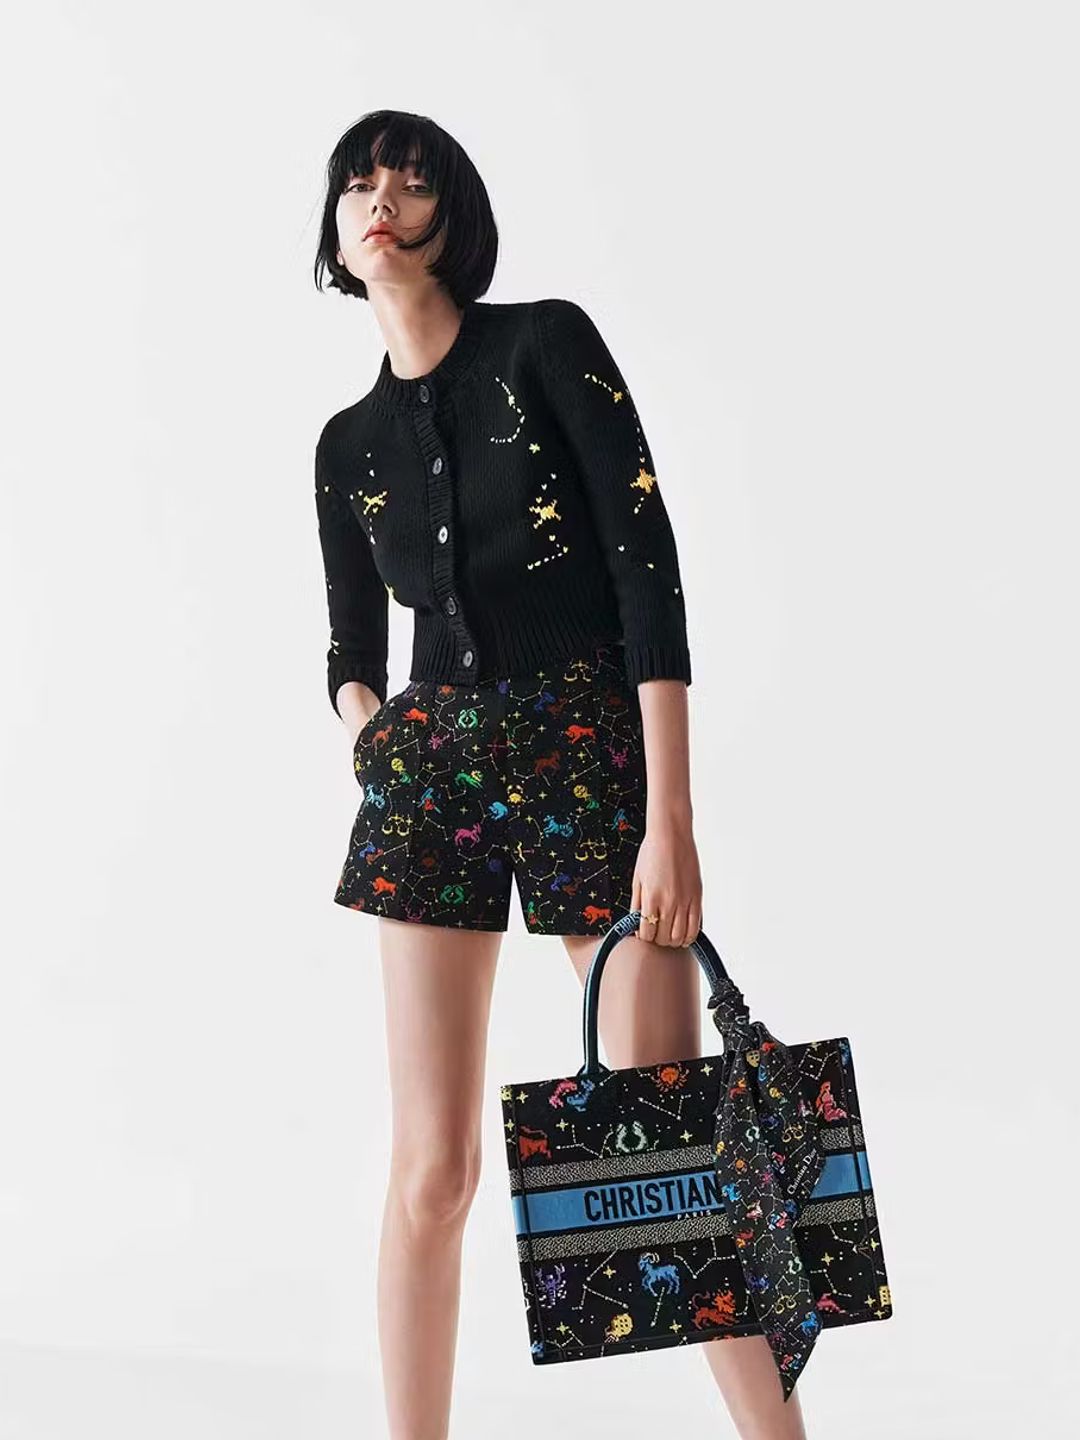 A Dior model poses for a campaign image wearing a black cardigan and shorts 